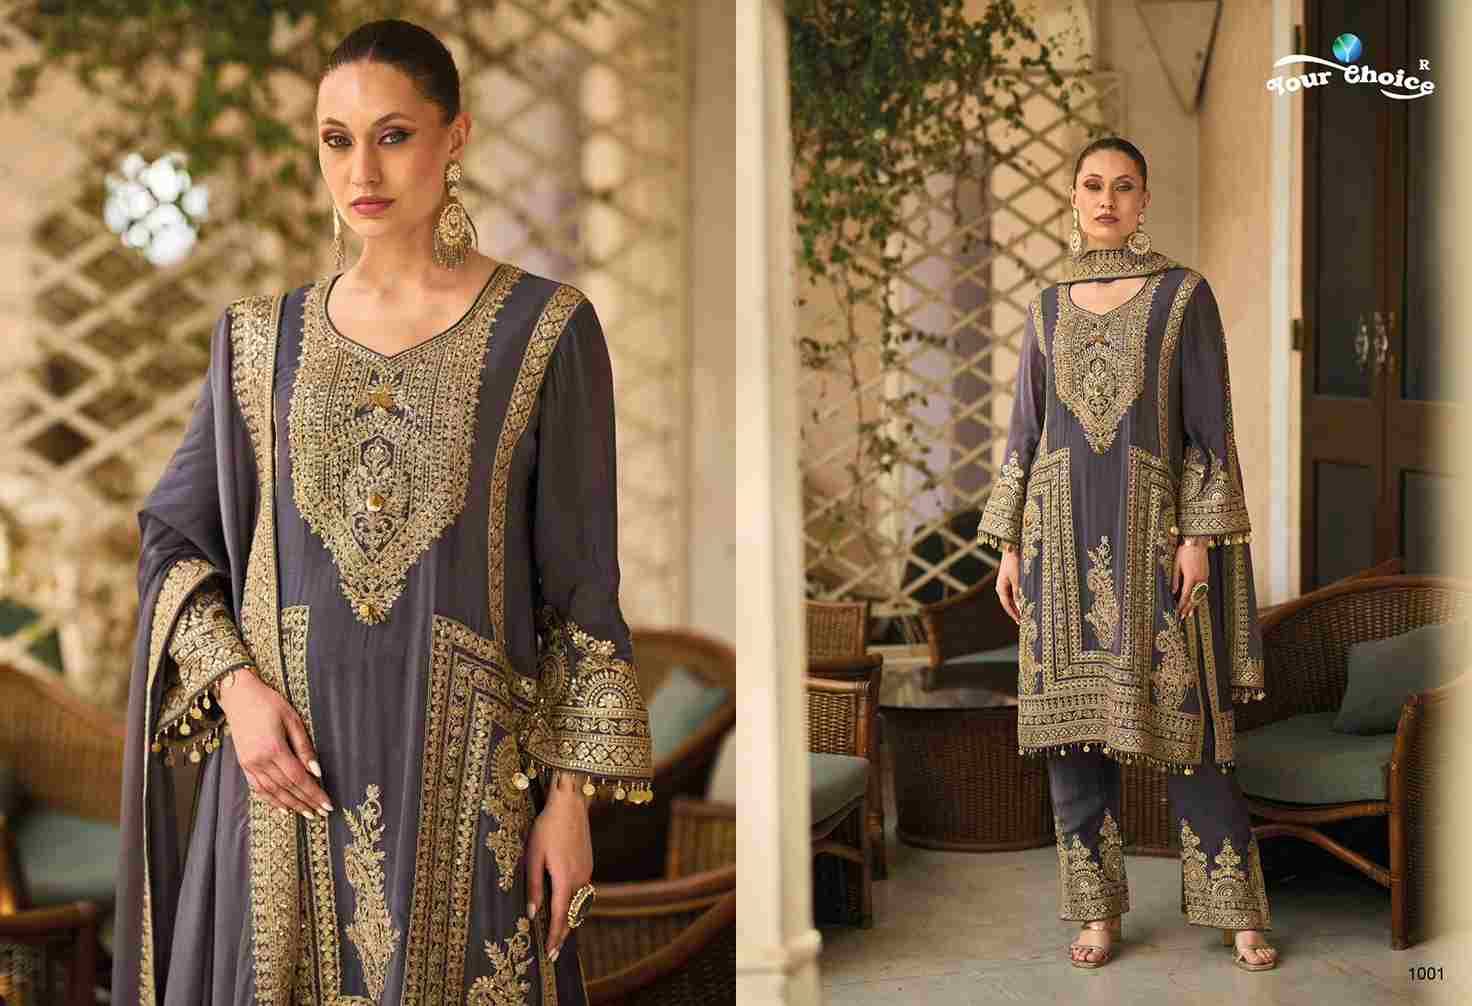 Barbee By Your Choice 1001 To 1004 Series Beautiful Festive Suits Colorful Stylish Fancy Casual Wear & Ethnic Wear Pure Chinnon Dresses At Wholesale Price